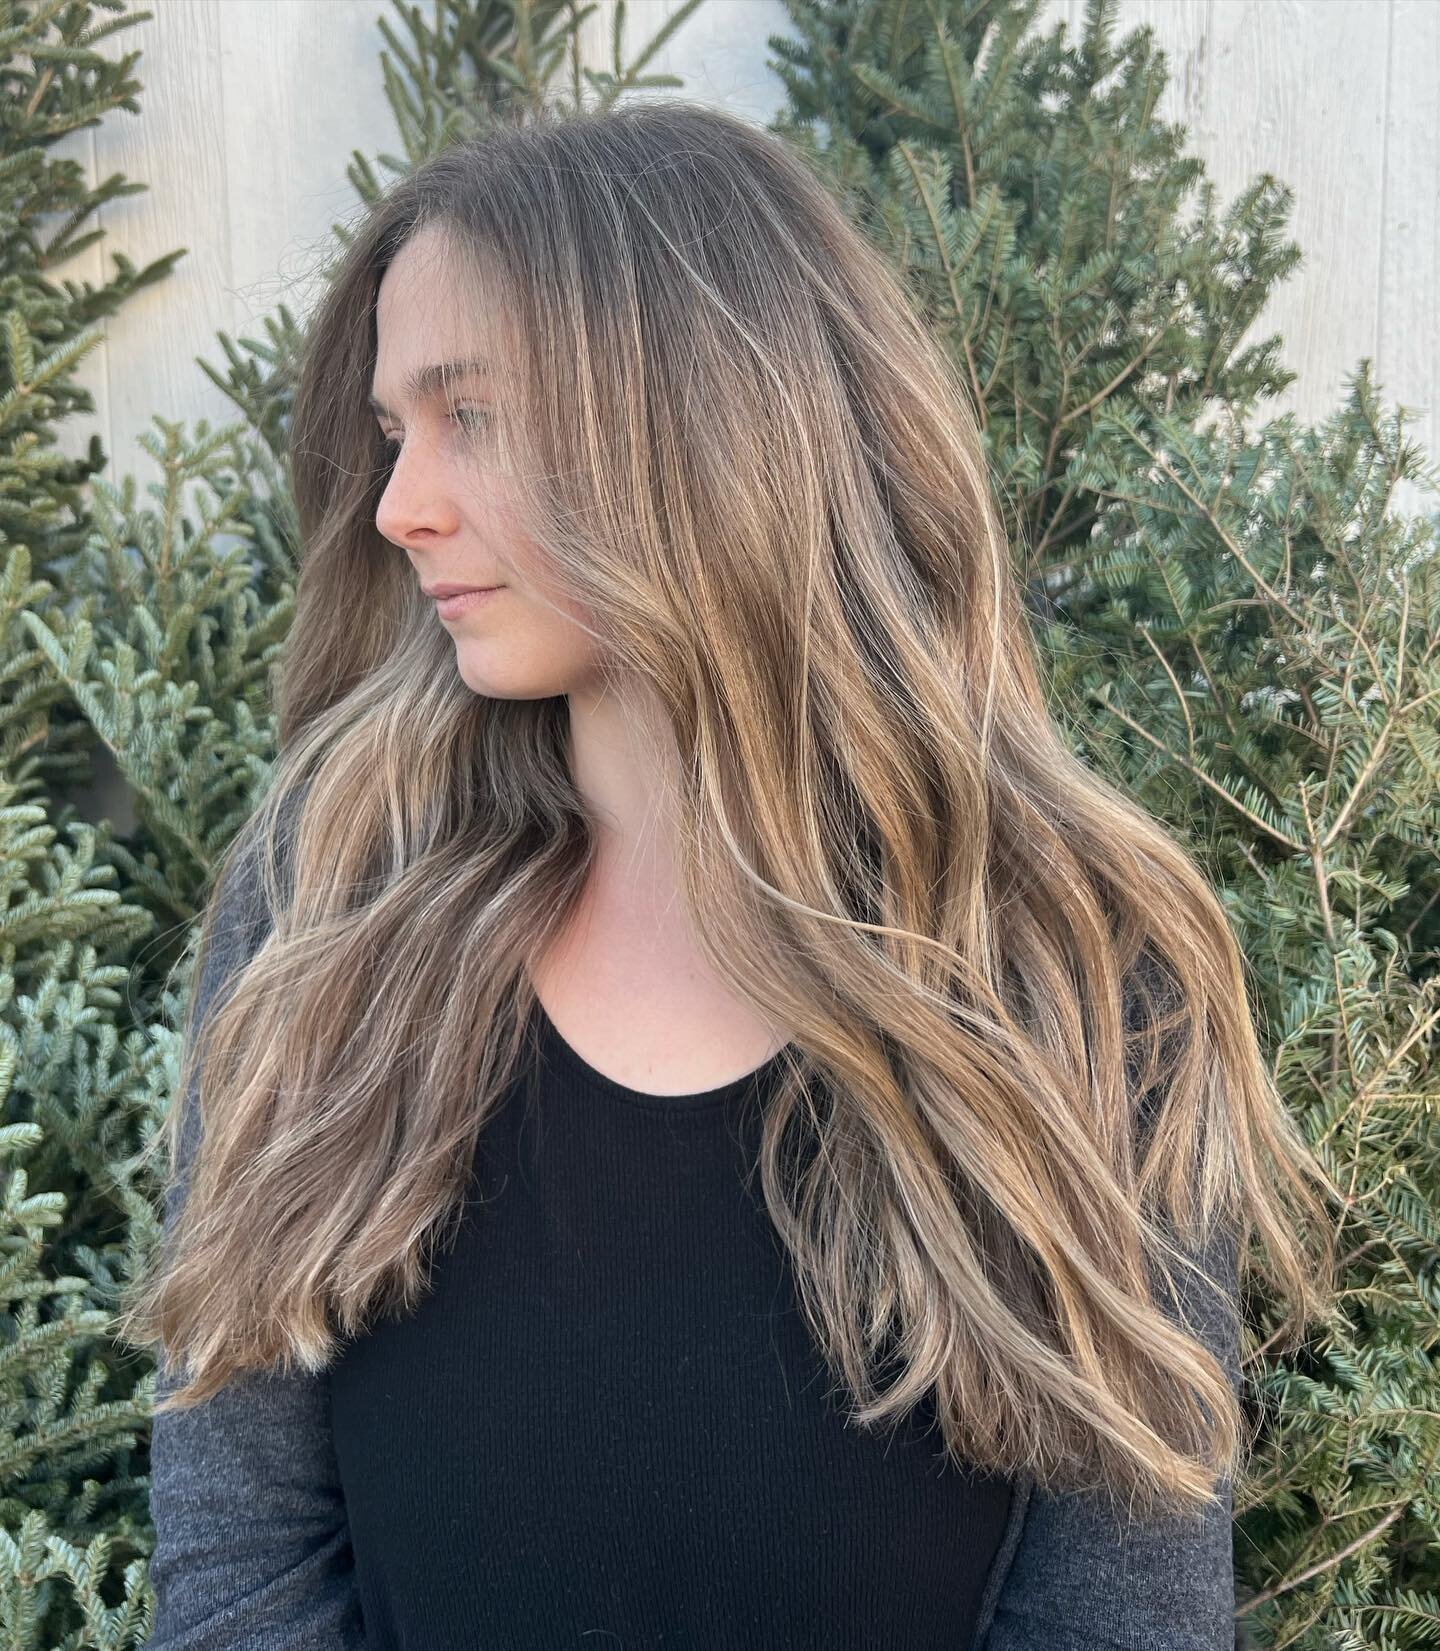 🌲🌲🌲
Foilayage and cut 
- - - -

#stlstylist #stlhairstylist #stlhairsalon #stlhaircut #webstergrovesmo #websteruniversity #salonblvd #stlmodel #stlcolorist #brownhaircolor #hairtutorial #hairtrends #hairtips #brownhairstl #blondehairstl #brondestl